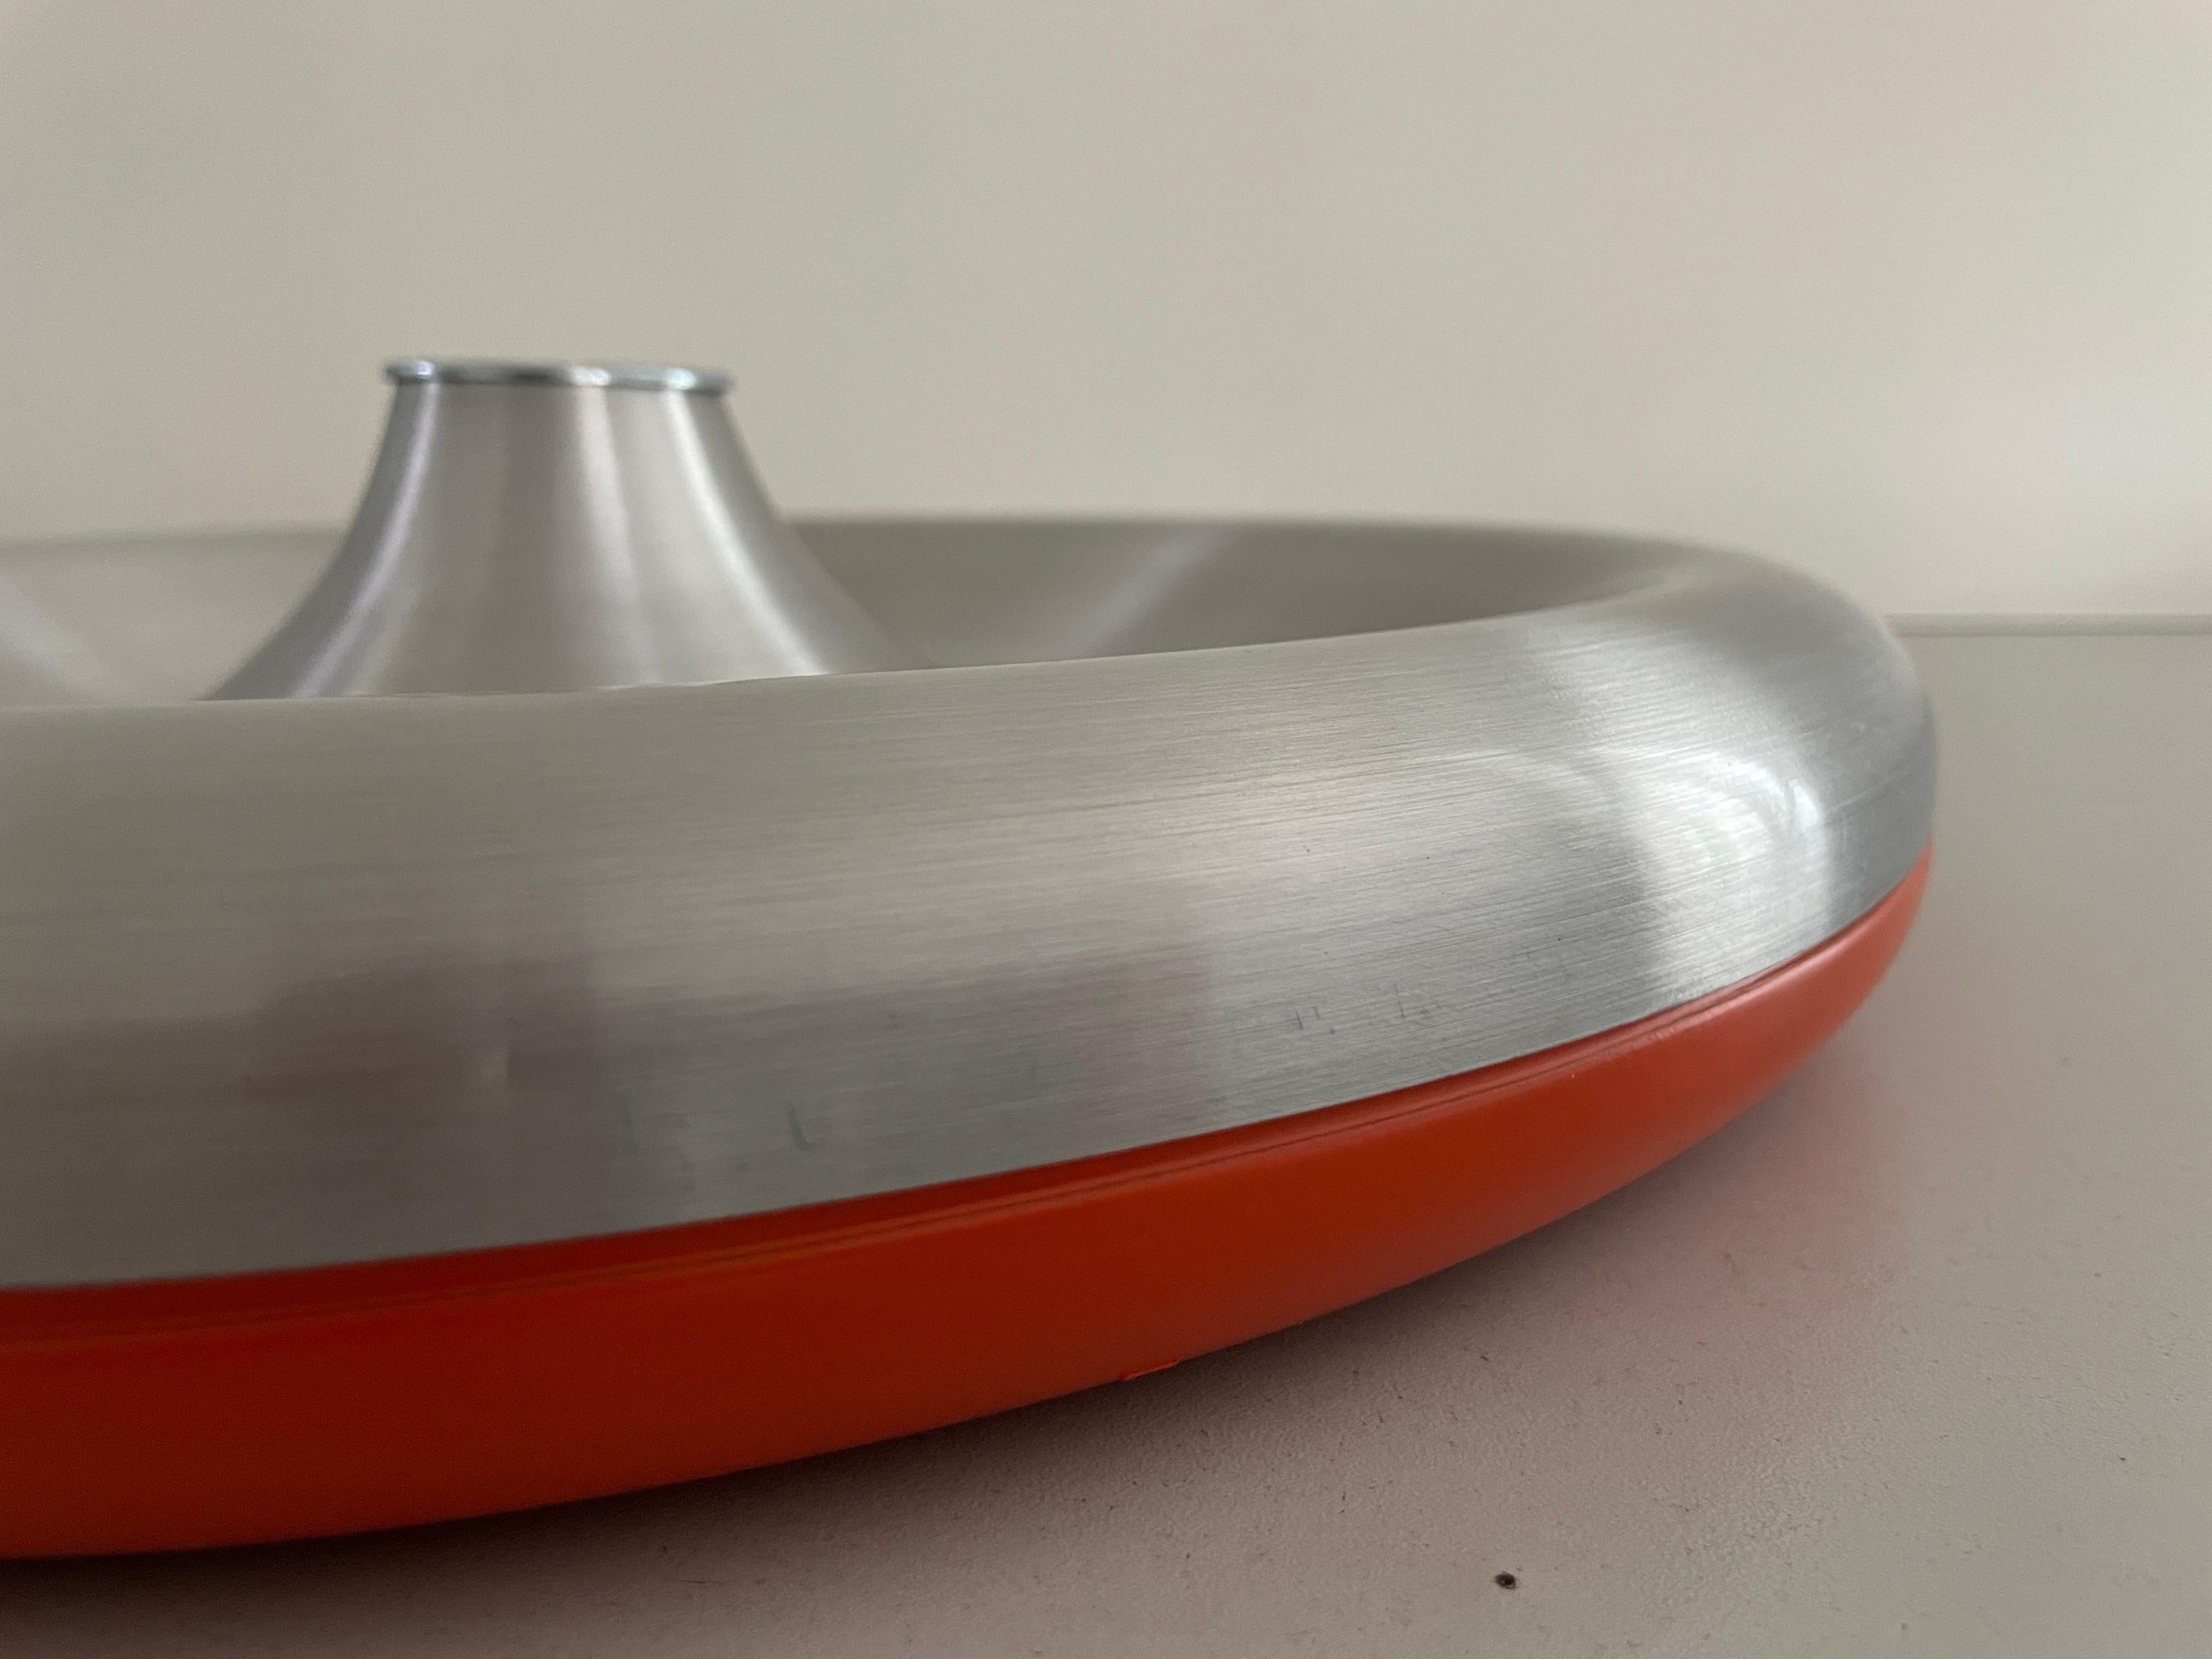 Metallic Grey and Orange Space Age Flush Mount Ceiling Lamp, 1970s, Germany For Sale 2